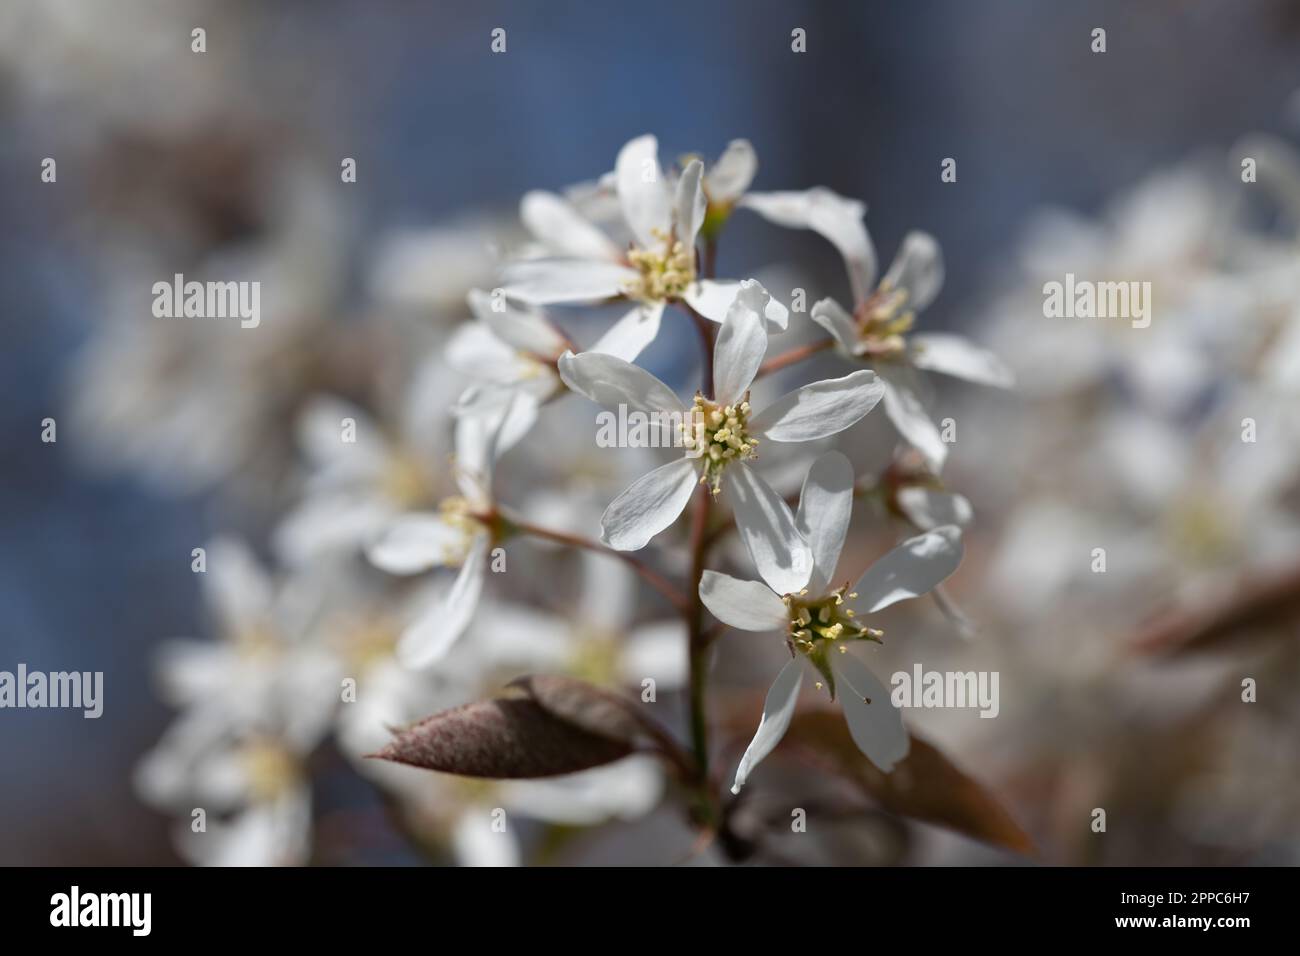 Close up of the delicate white flowers of the Rock Pear (Amelanchier lamarckii) growing against a blue sky in Spring. The young leaves are slightly re Stock Photo